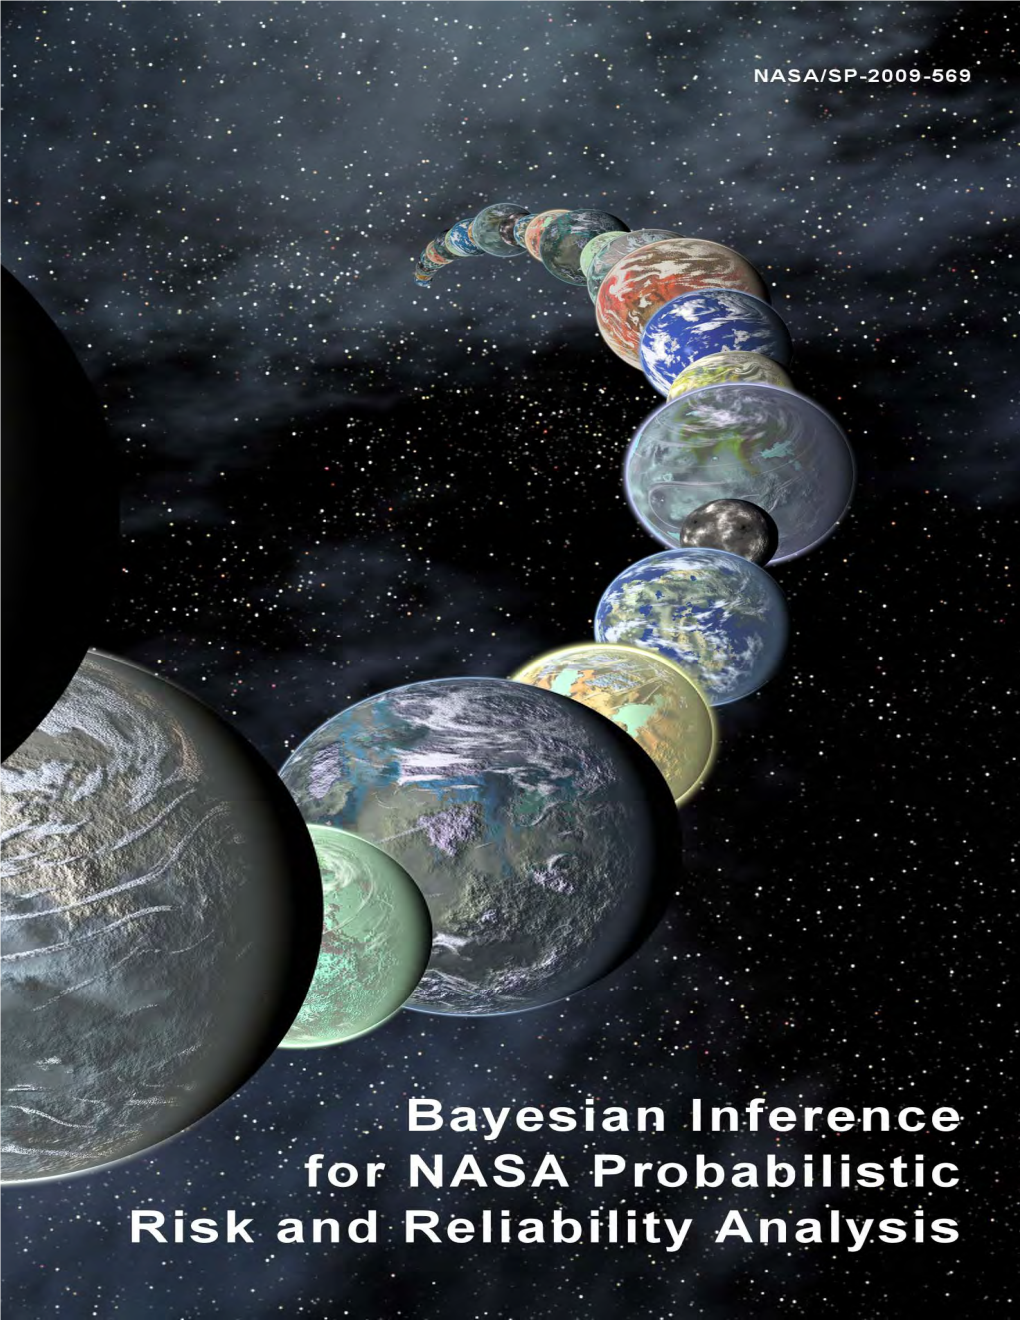 NASA Bayesian Inference for Probabilistic Risk Analysis